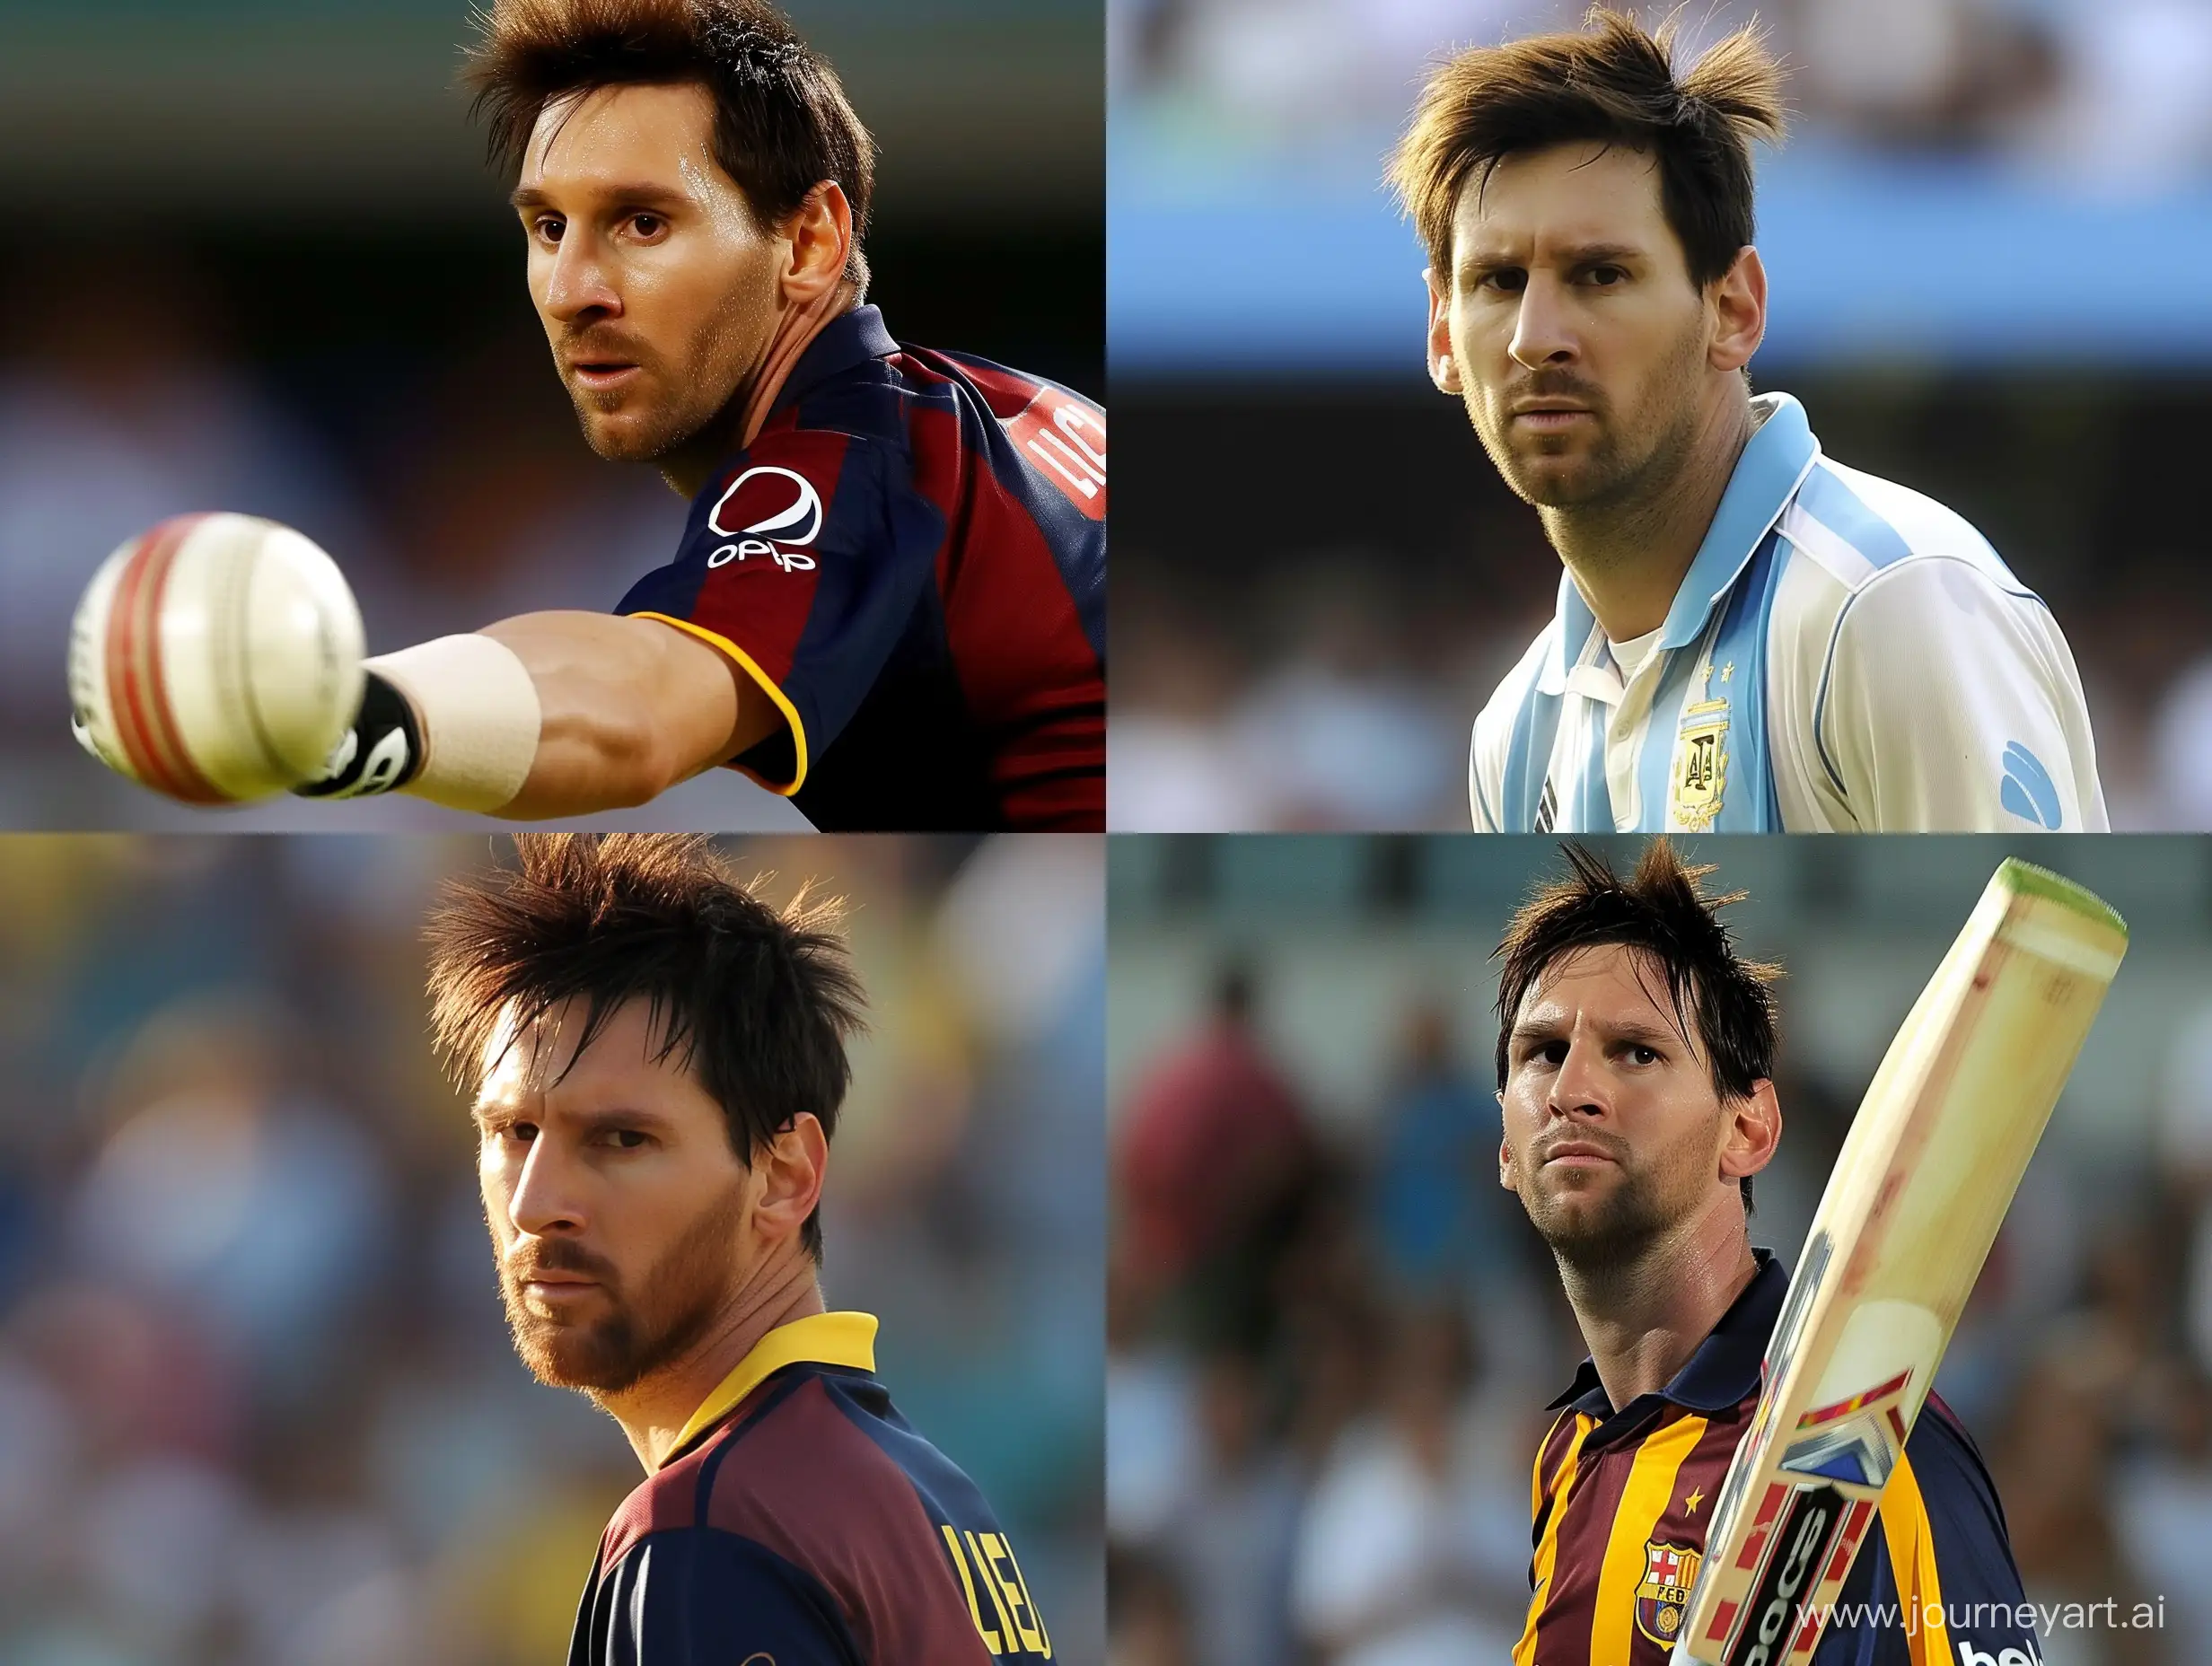 Leo Messi Showcases Cricket Skills in Dynamic Action